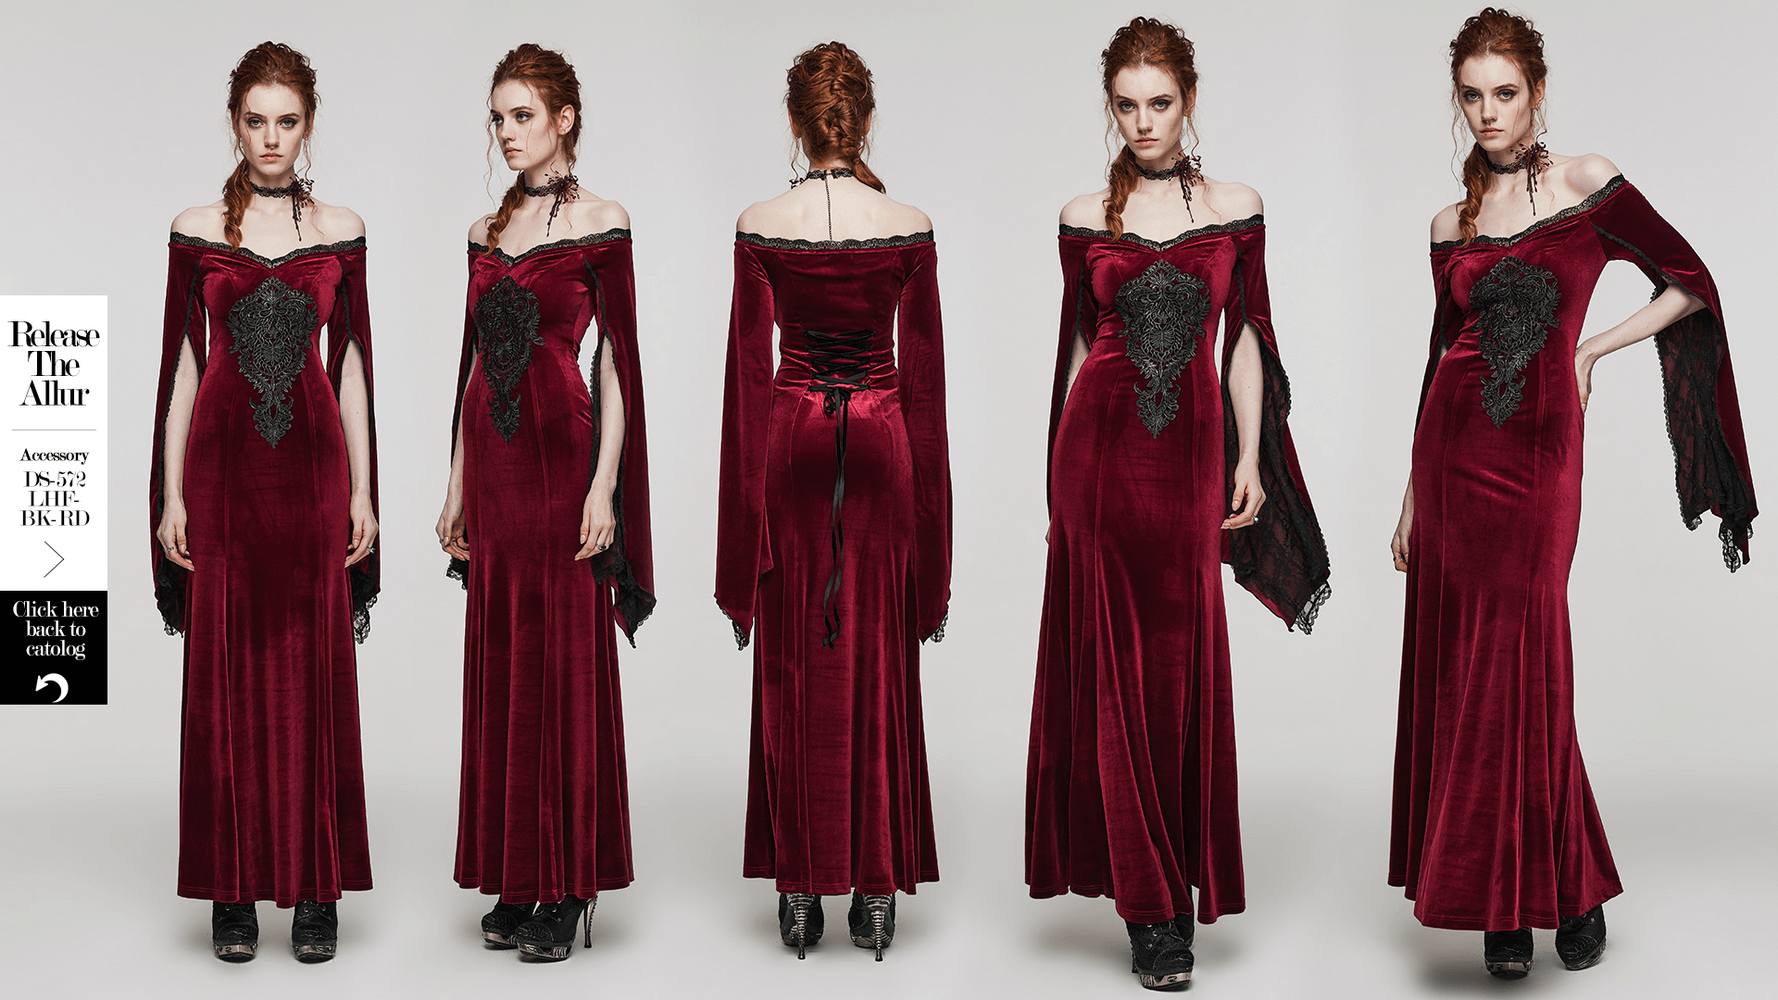 Elegant Red Velvet Gothic Dress with Lace Sleeves - HARD'N'HEAVY